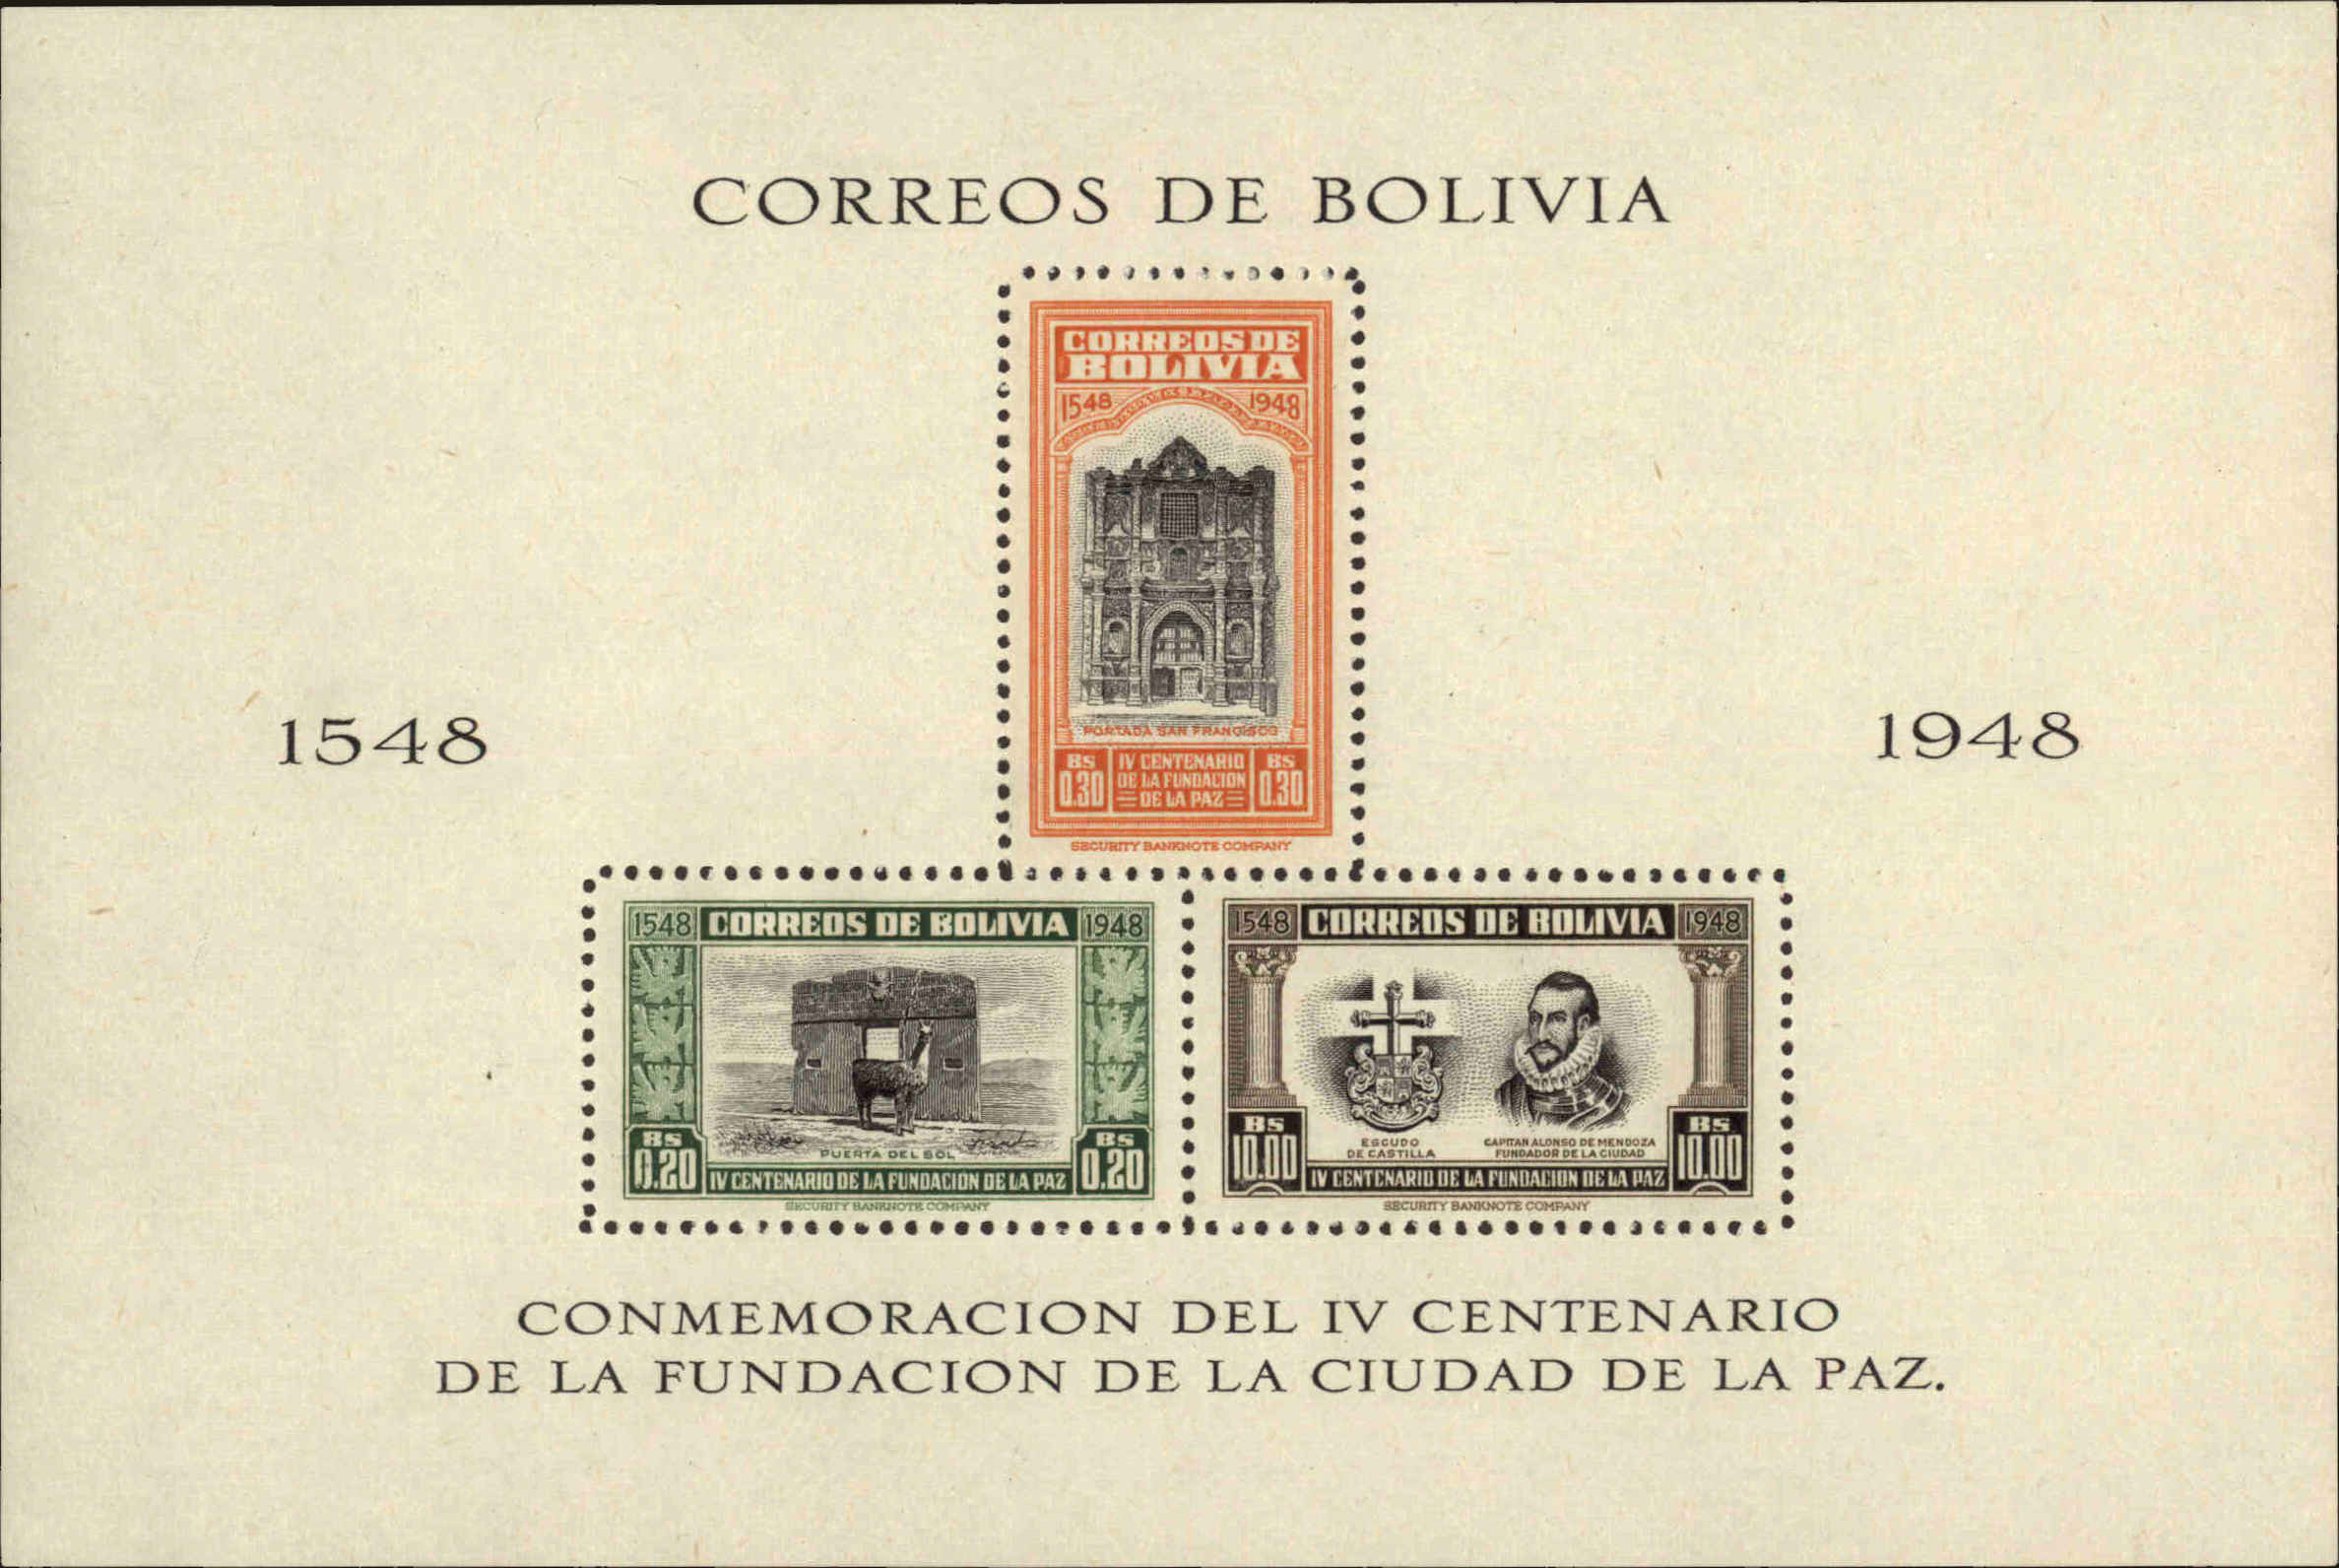 Front view of Bolivia 351a collectors stamp